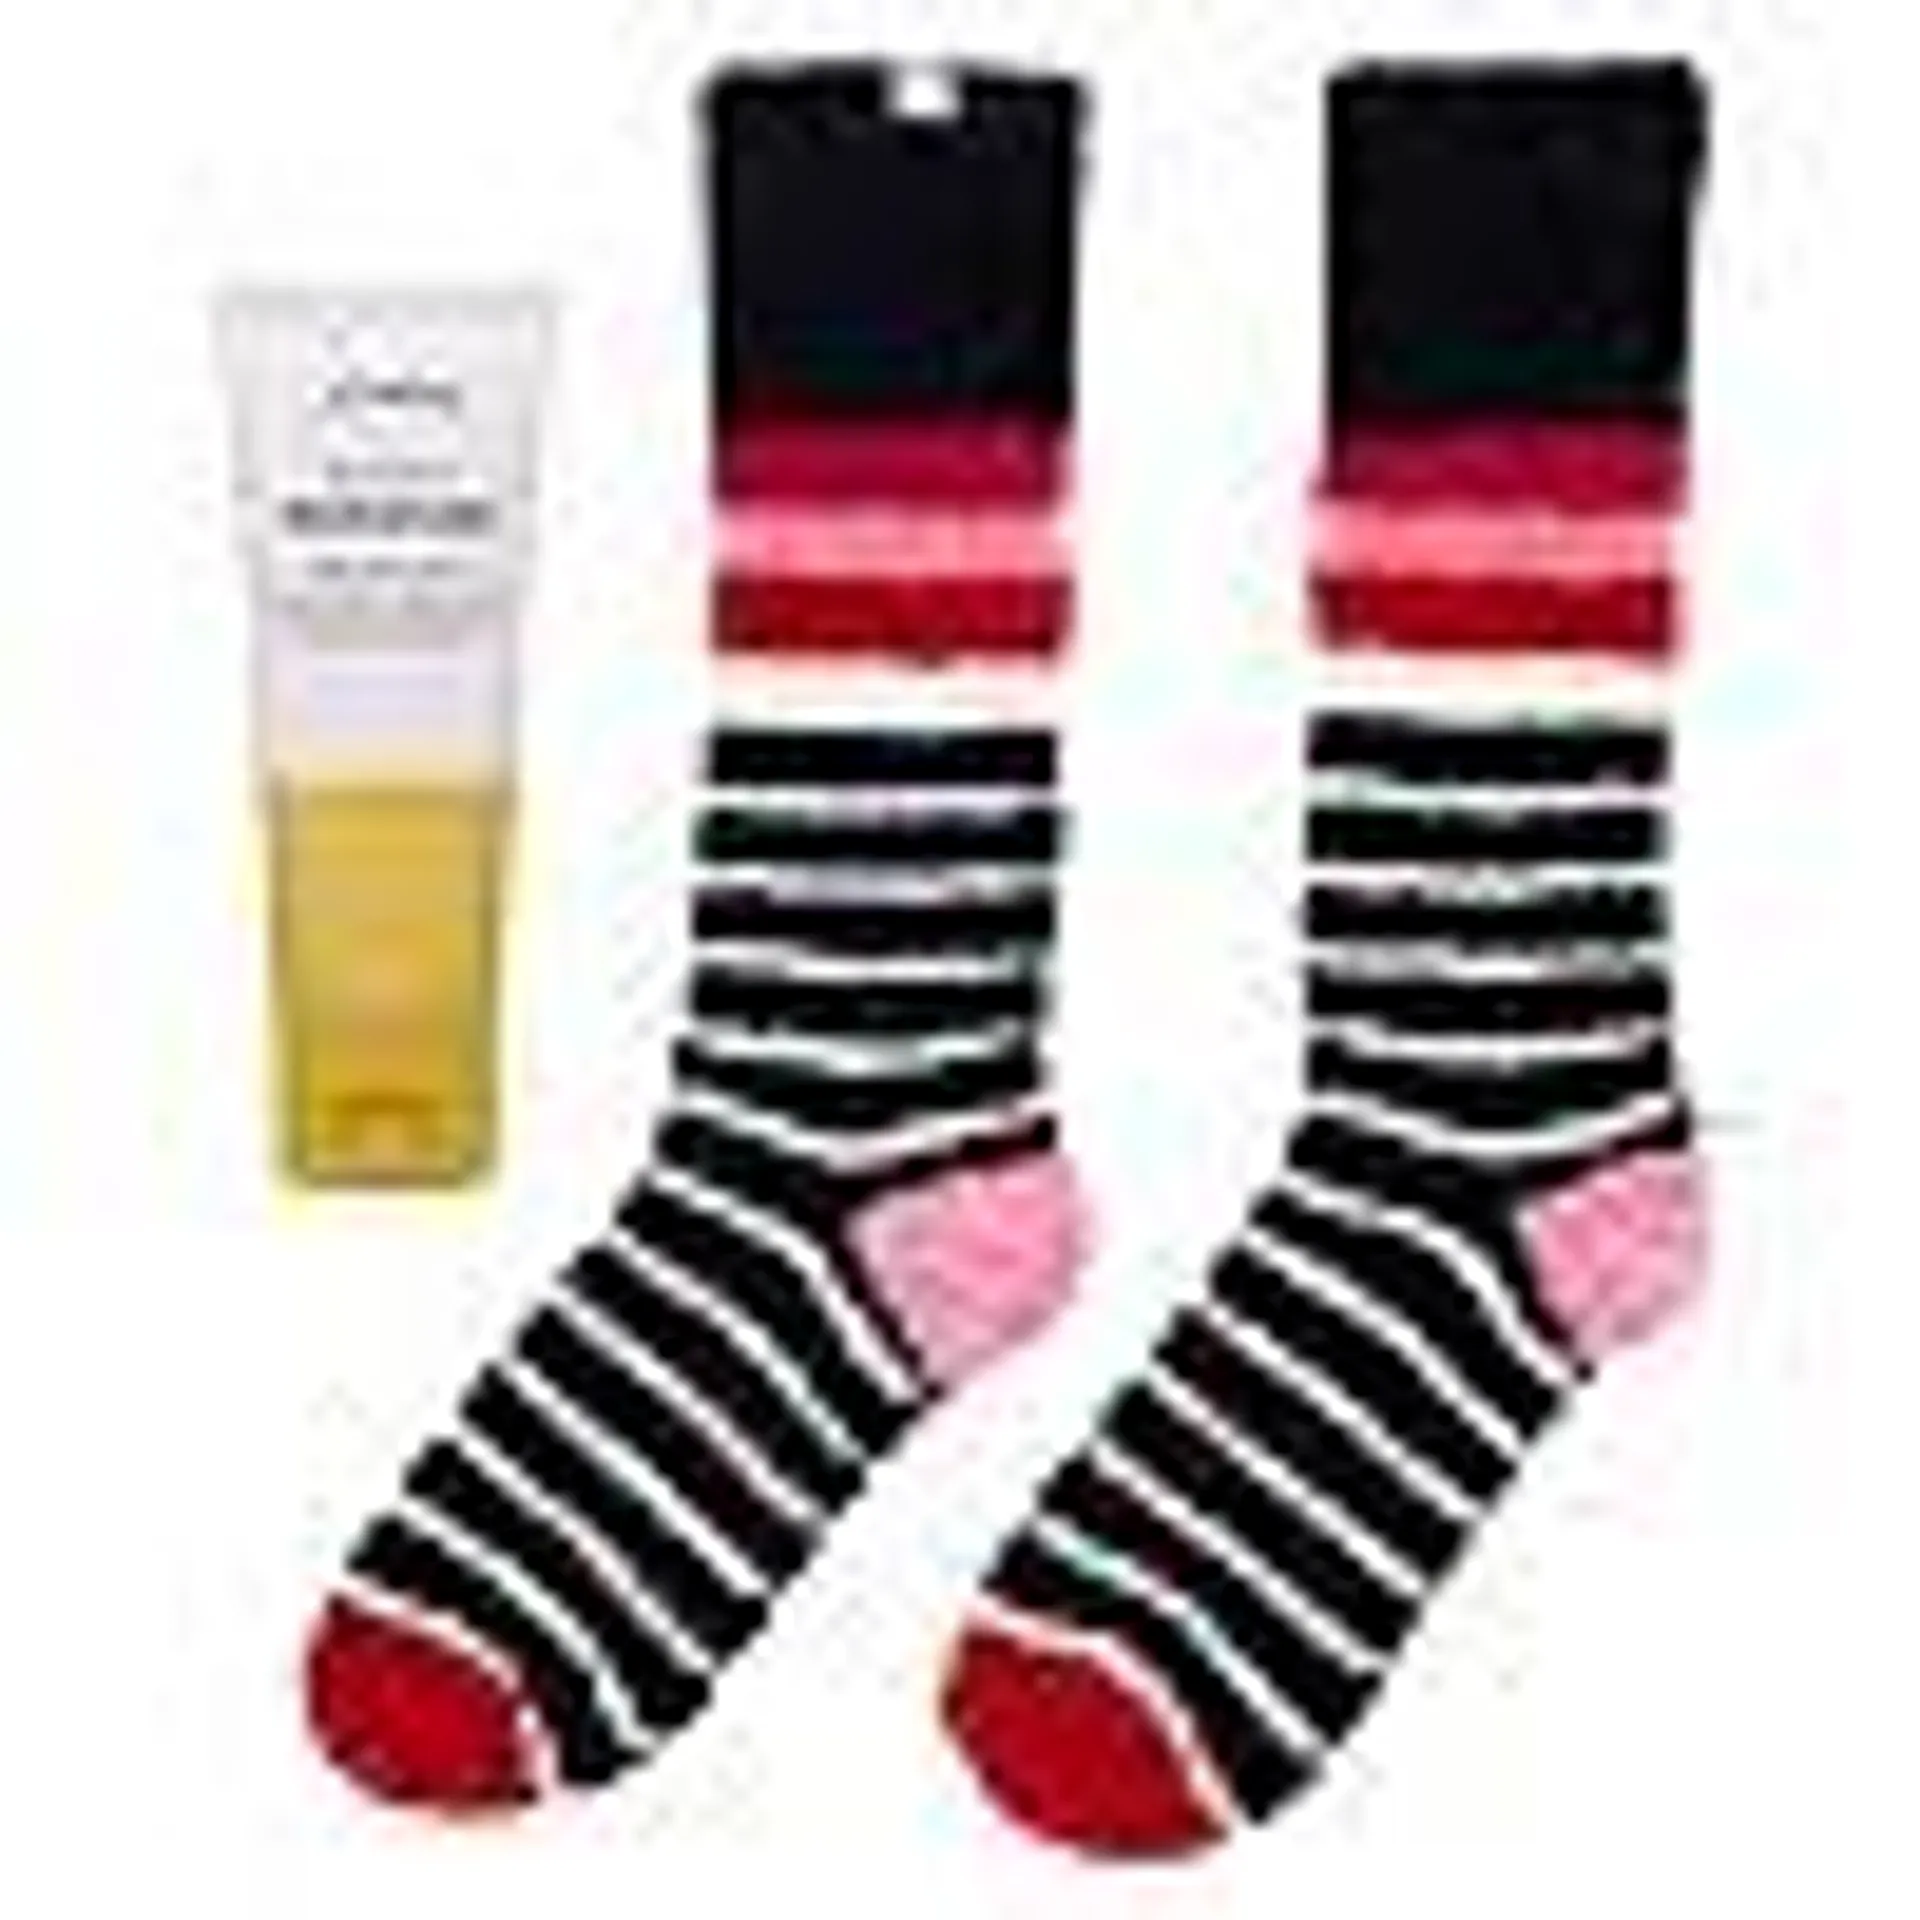 Joules Cosy Night In Fluffy Socks & Foot Cream